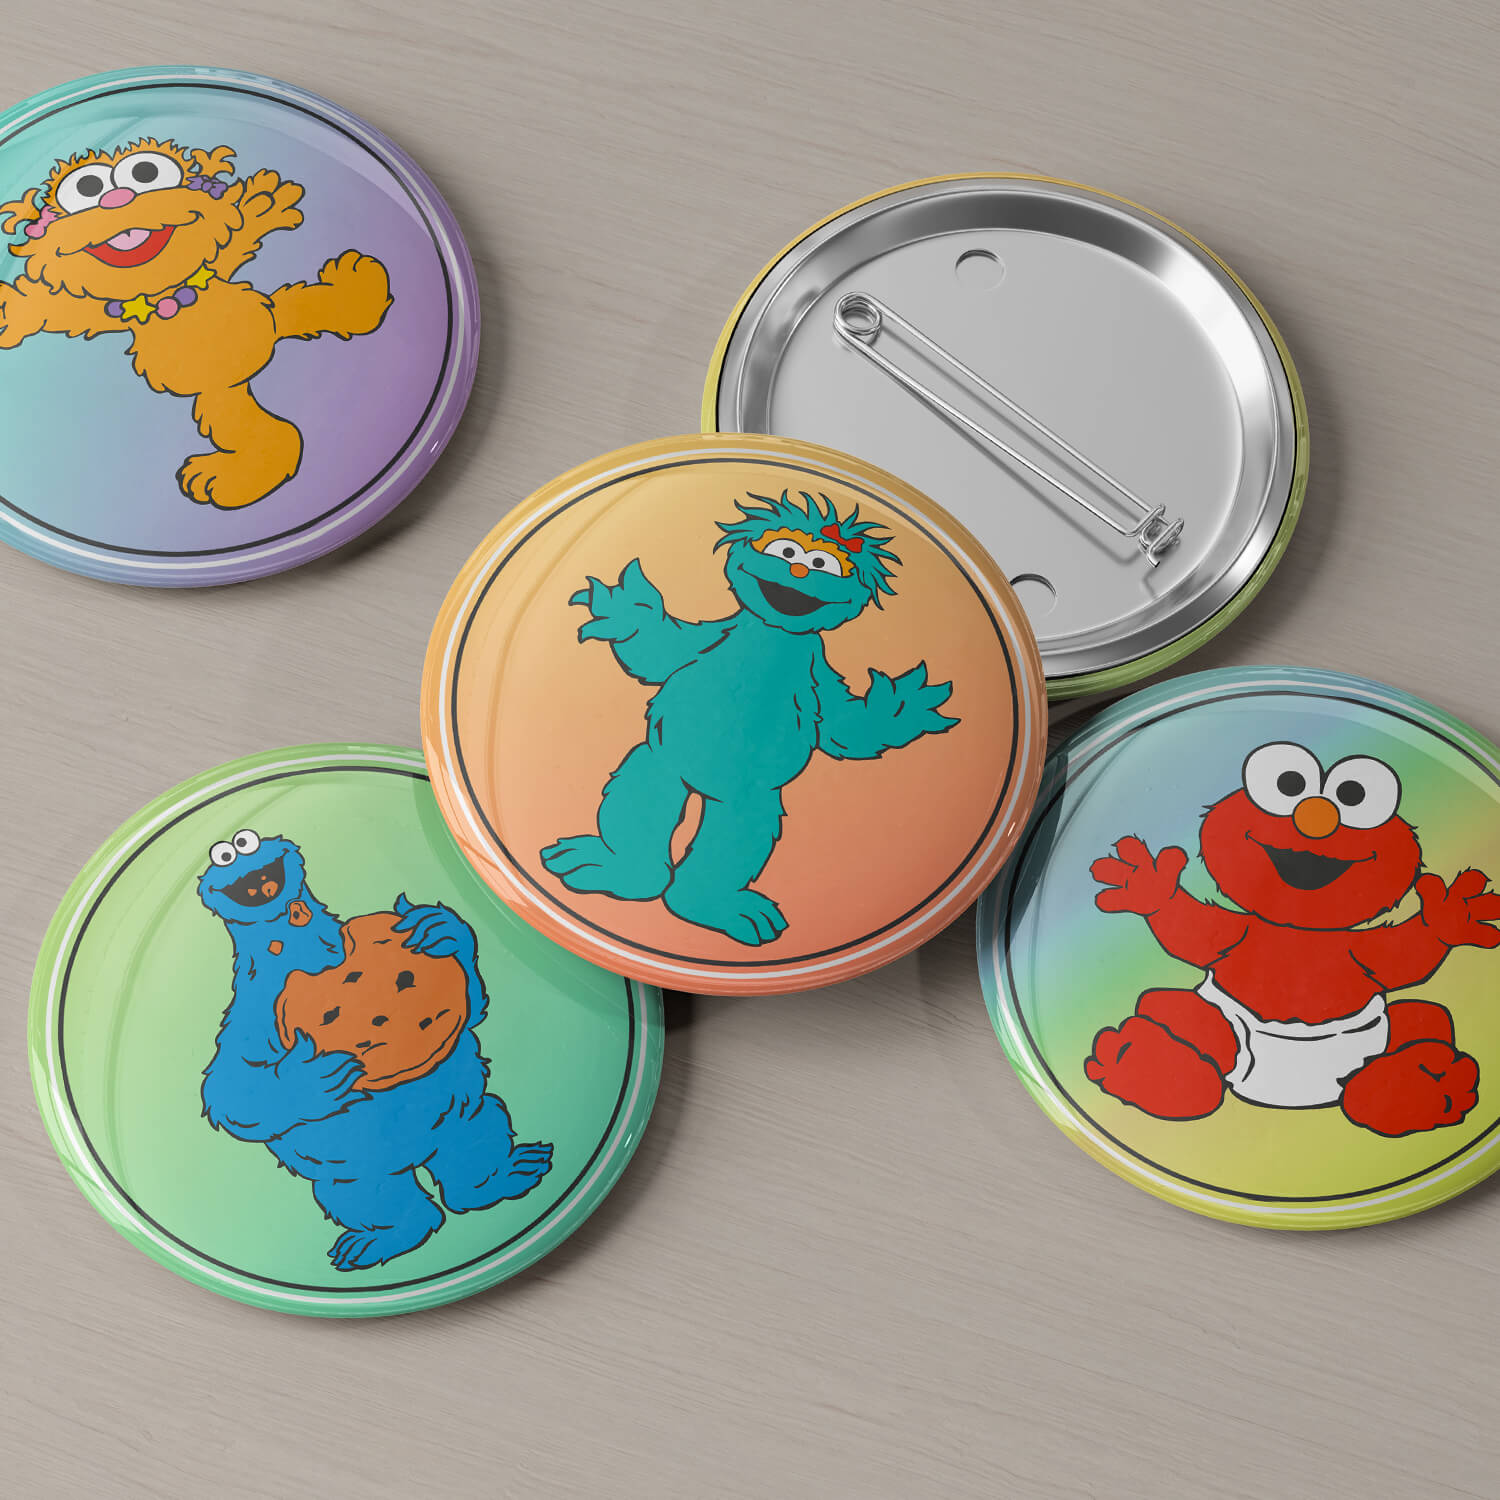 Elmo and Cookie Monster on badges.